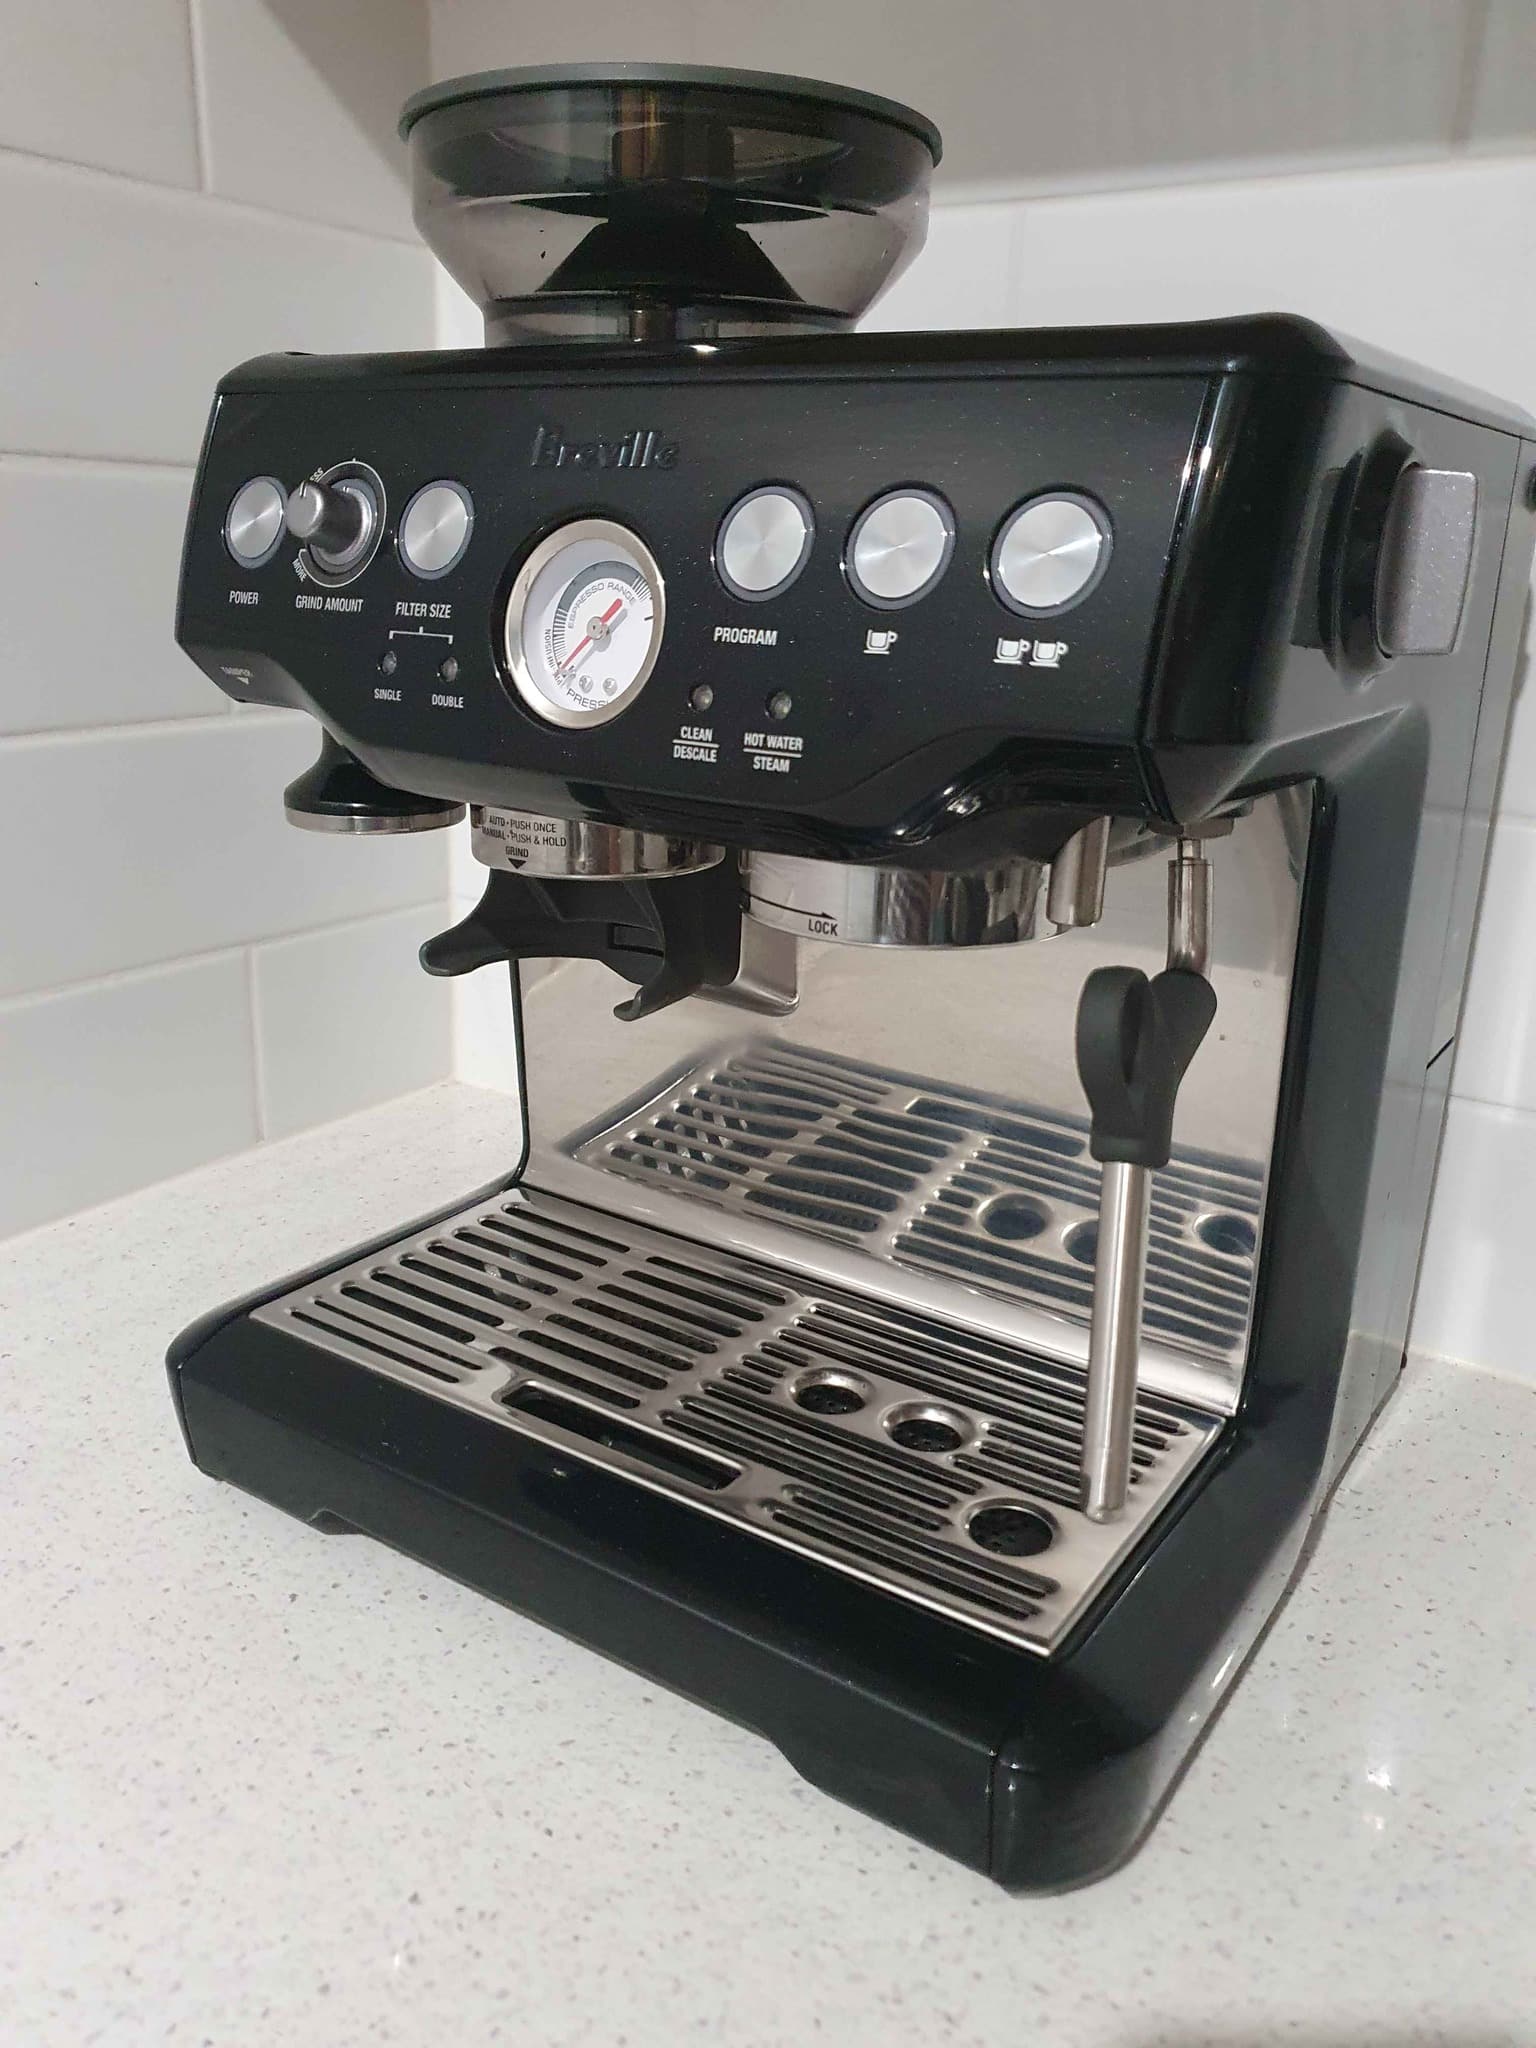 Breville Barista Express is equipped with a conical burr grinder